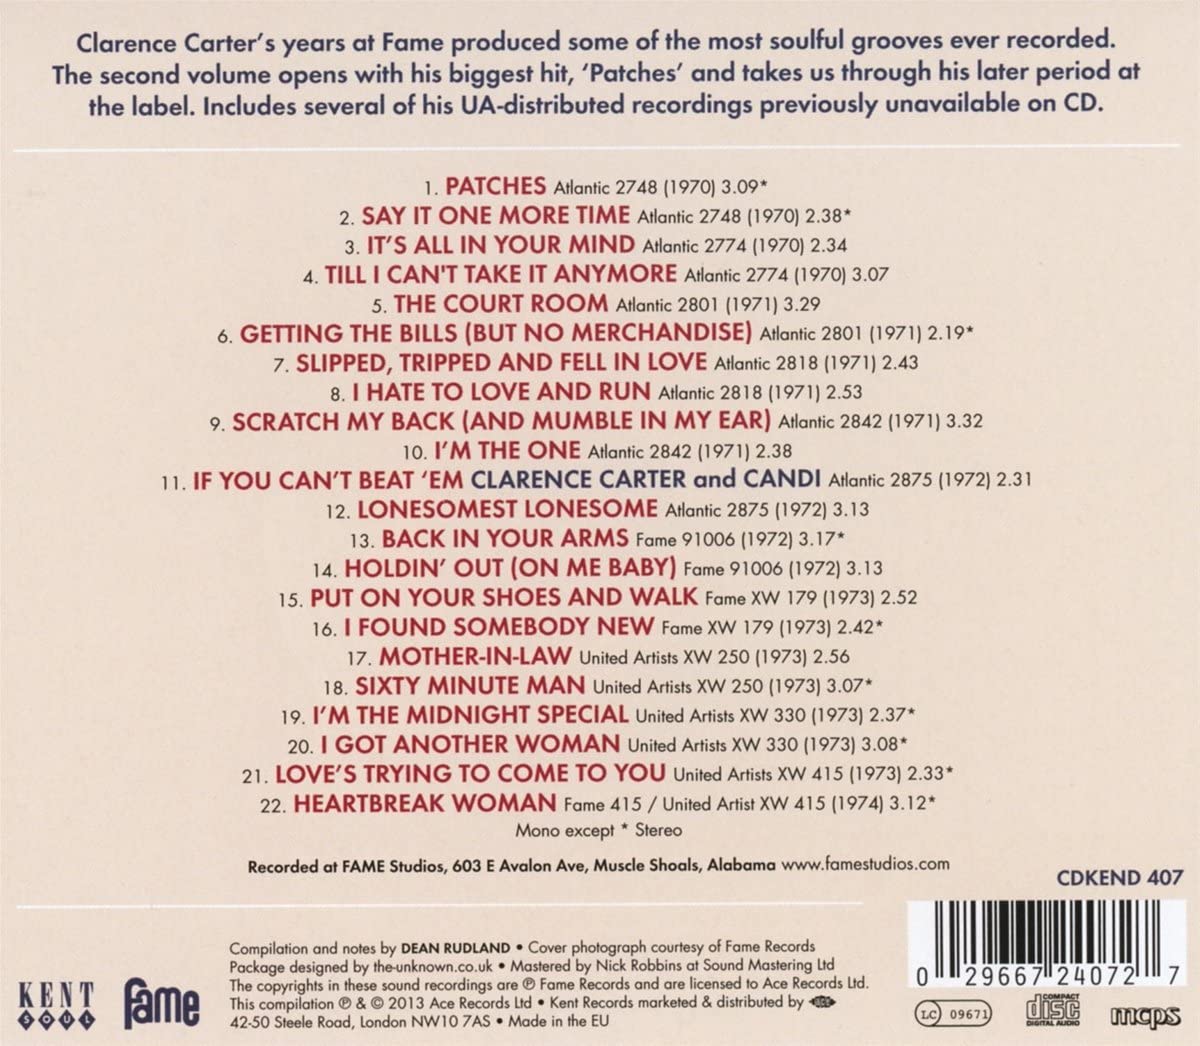 Clarence Carter - The Fame Singles Vol. 2 - CD